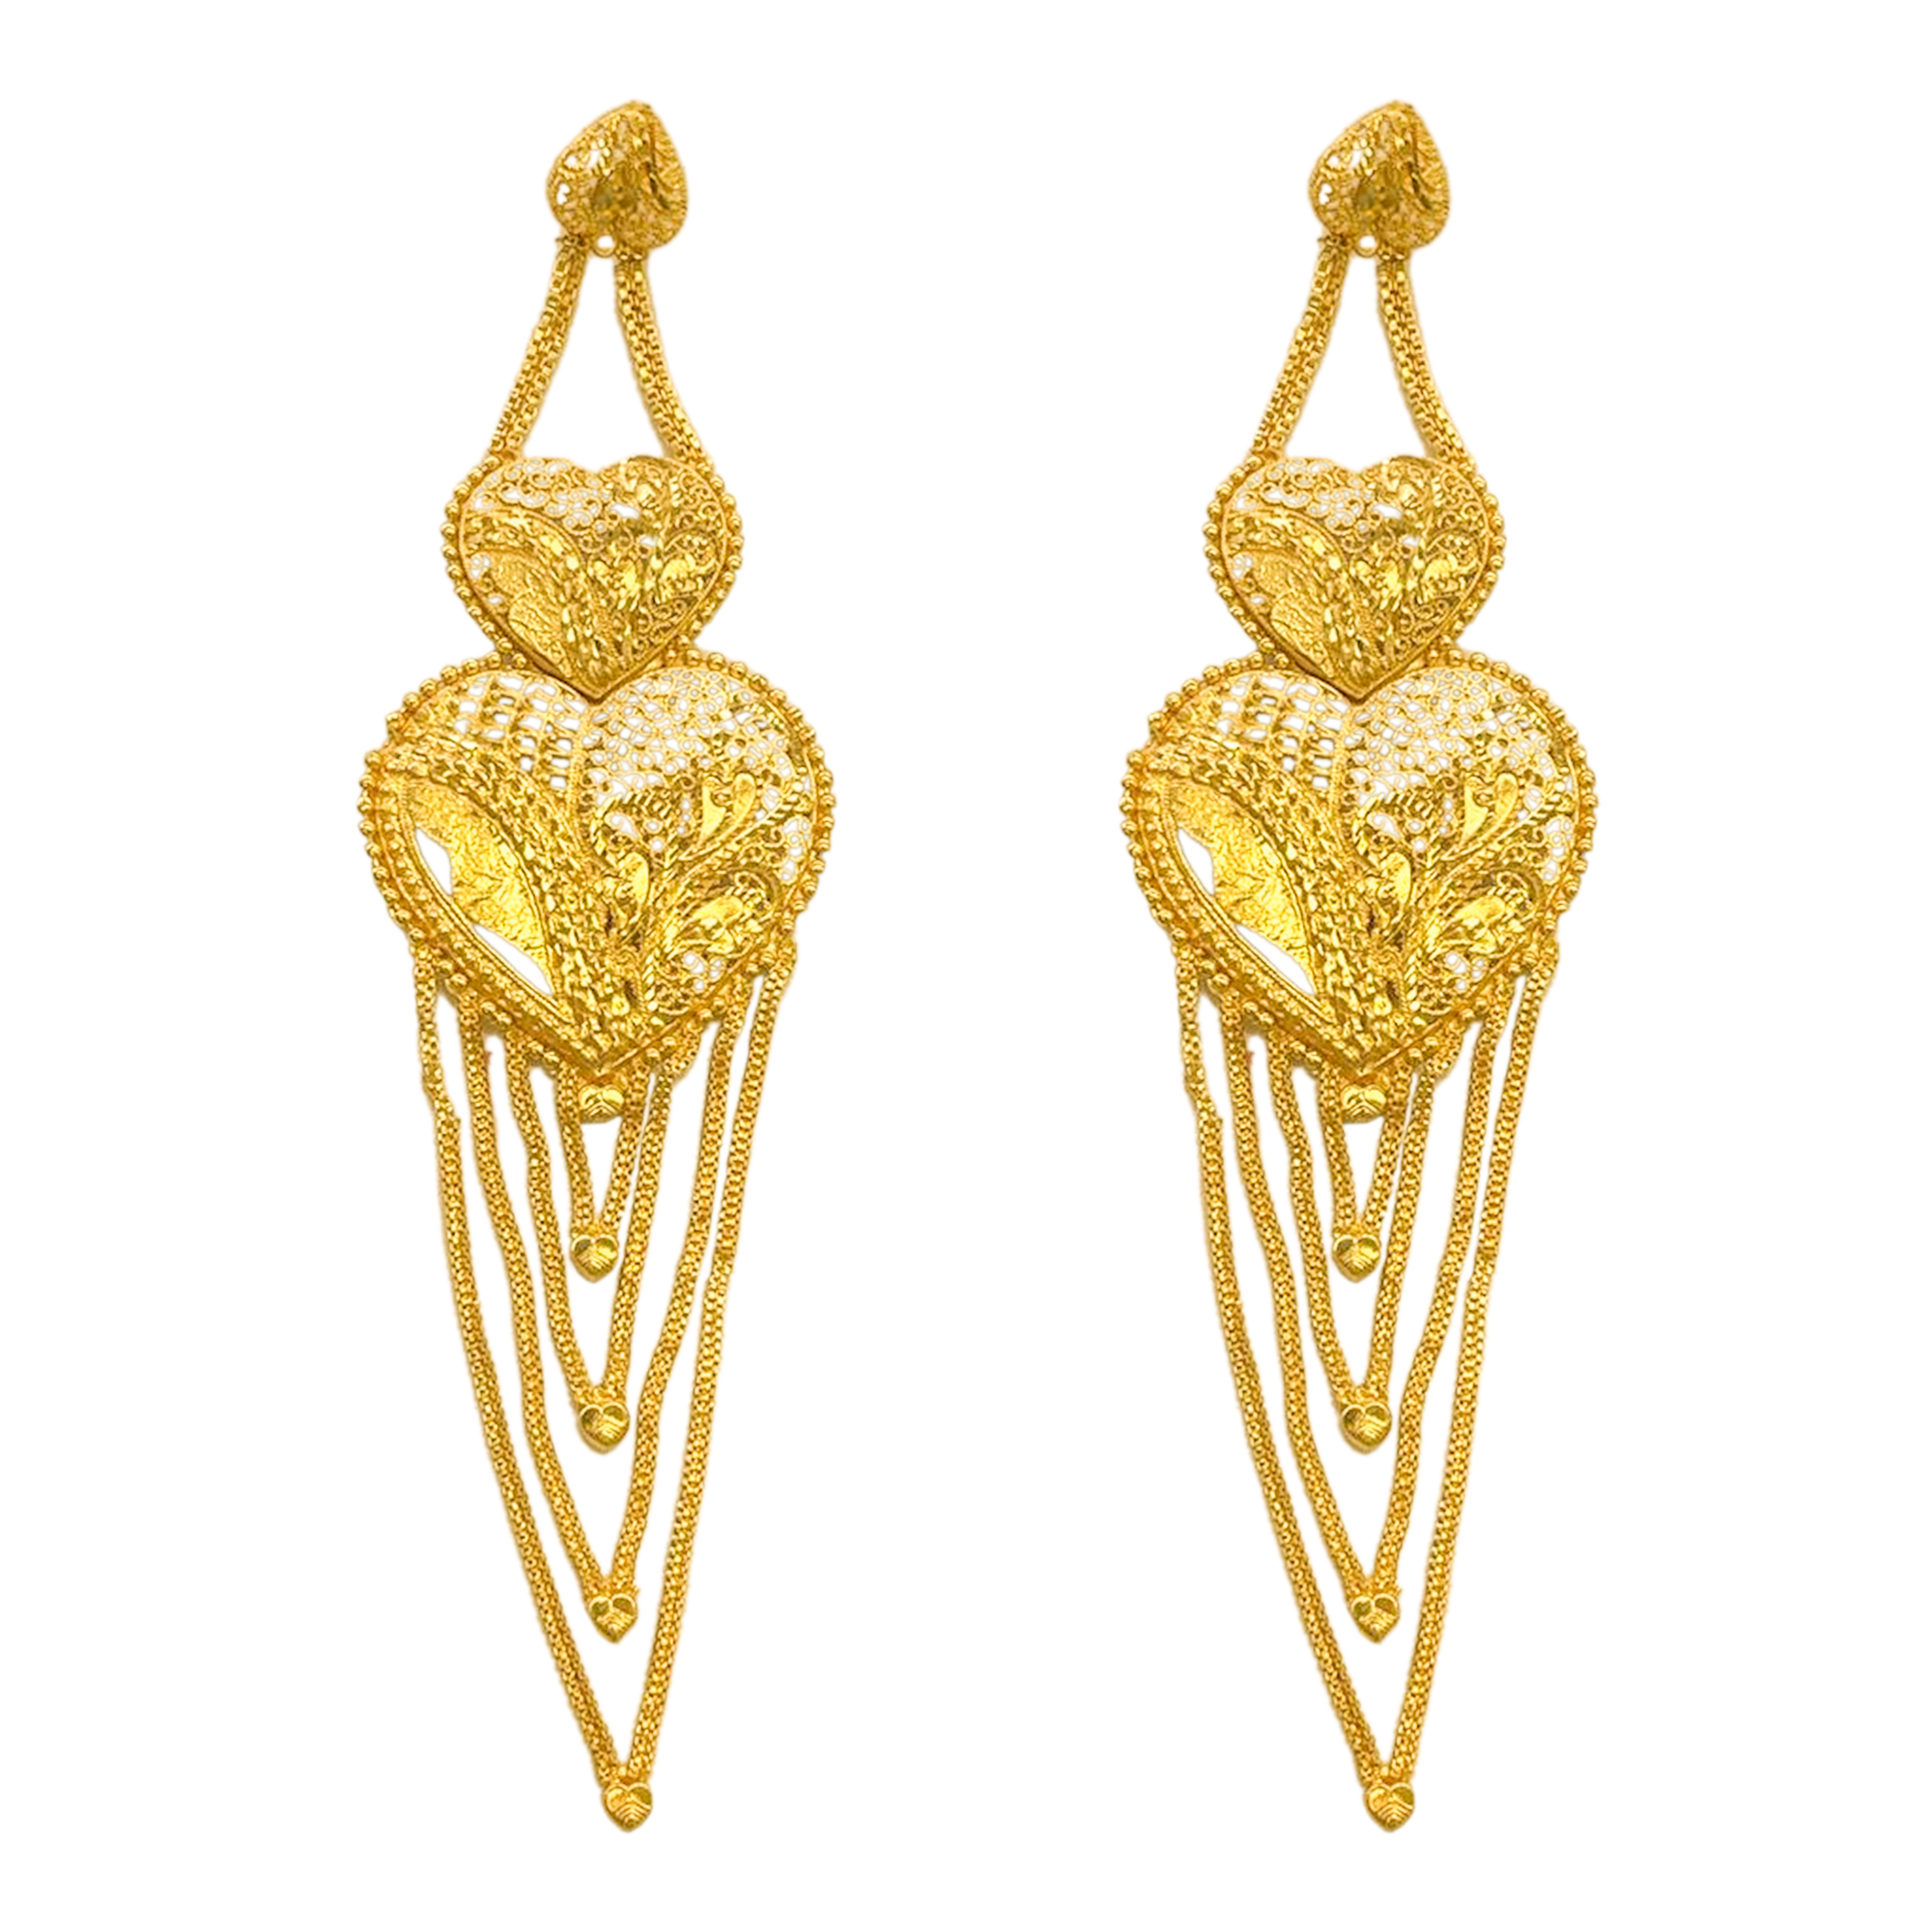 Gold-Plated Earrings, Statement Earrings, Gold-Plated Jewelry, Indian Jewelry Mall